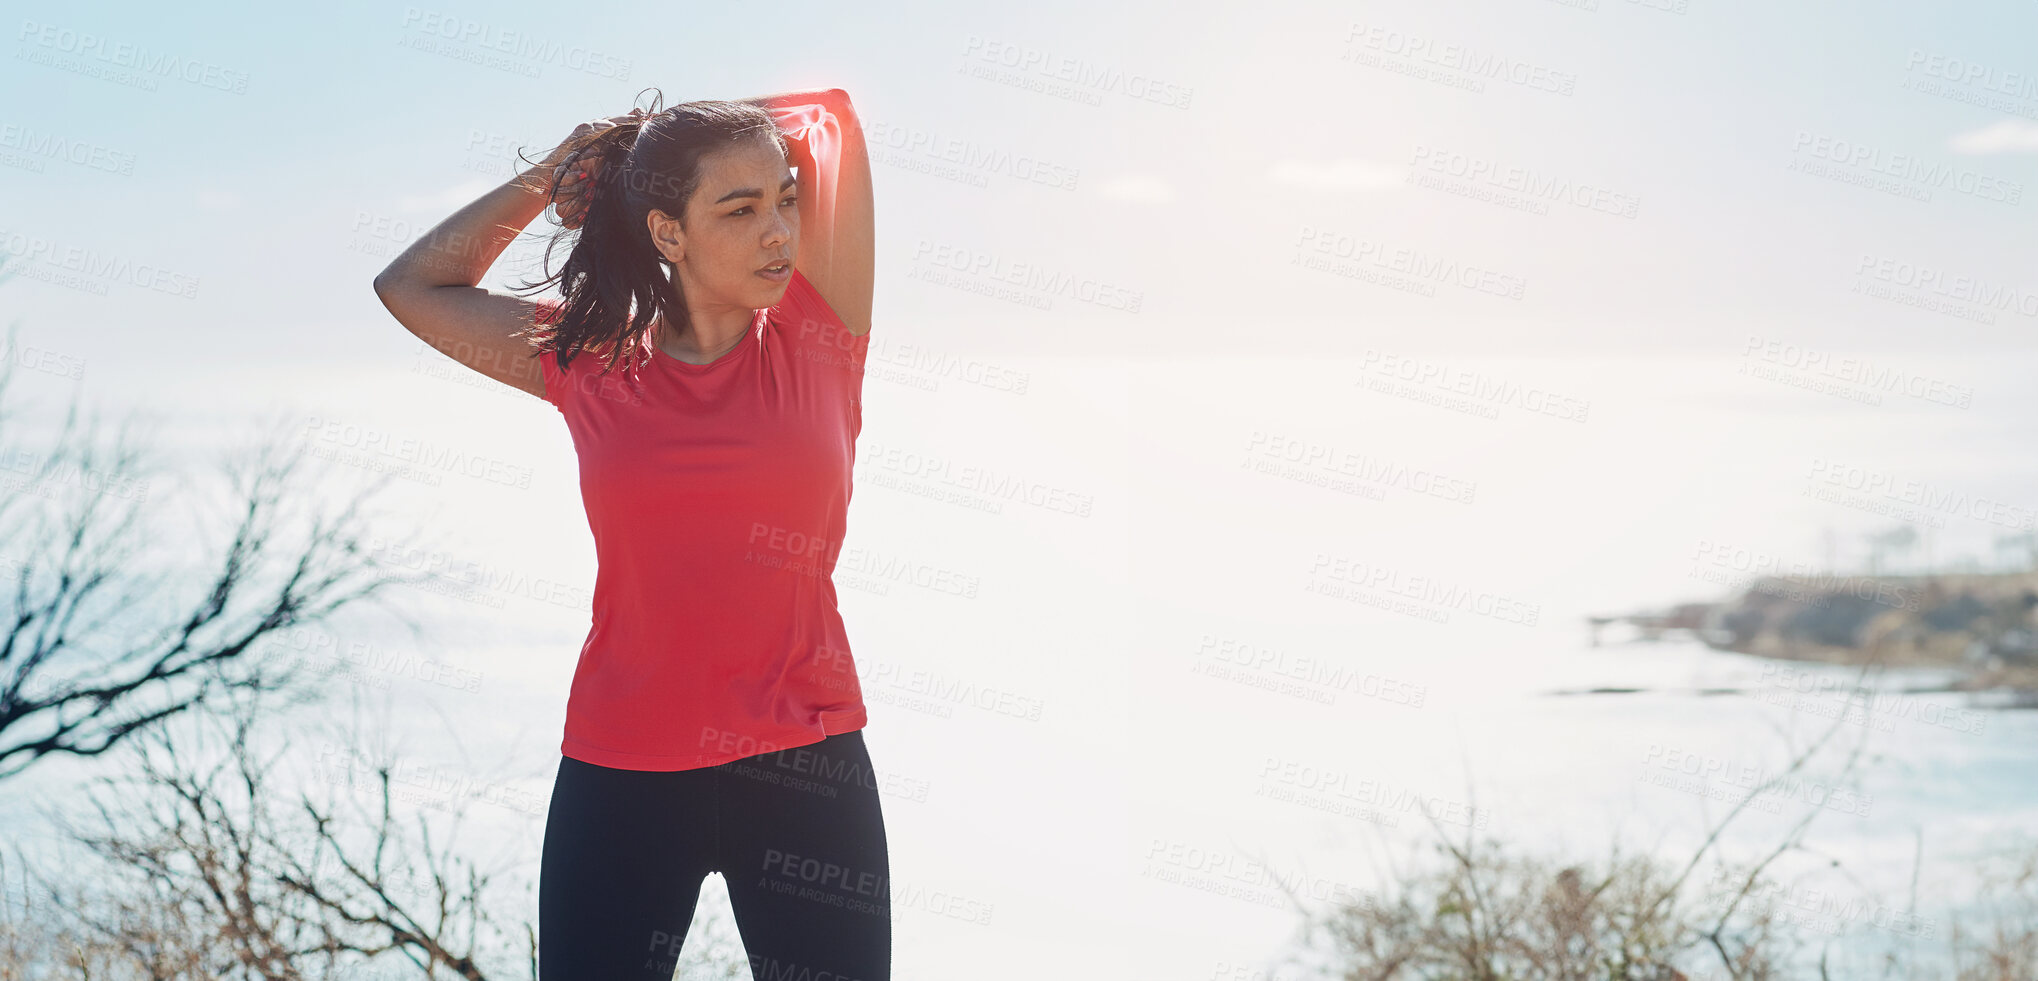 Buy stock photo Fitness, nature and stretching with sports woman getting ready for cardio or running outdoor. Exercise, training or warm up and athlete person with red glow elbow for inflammation, health or workout